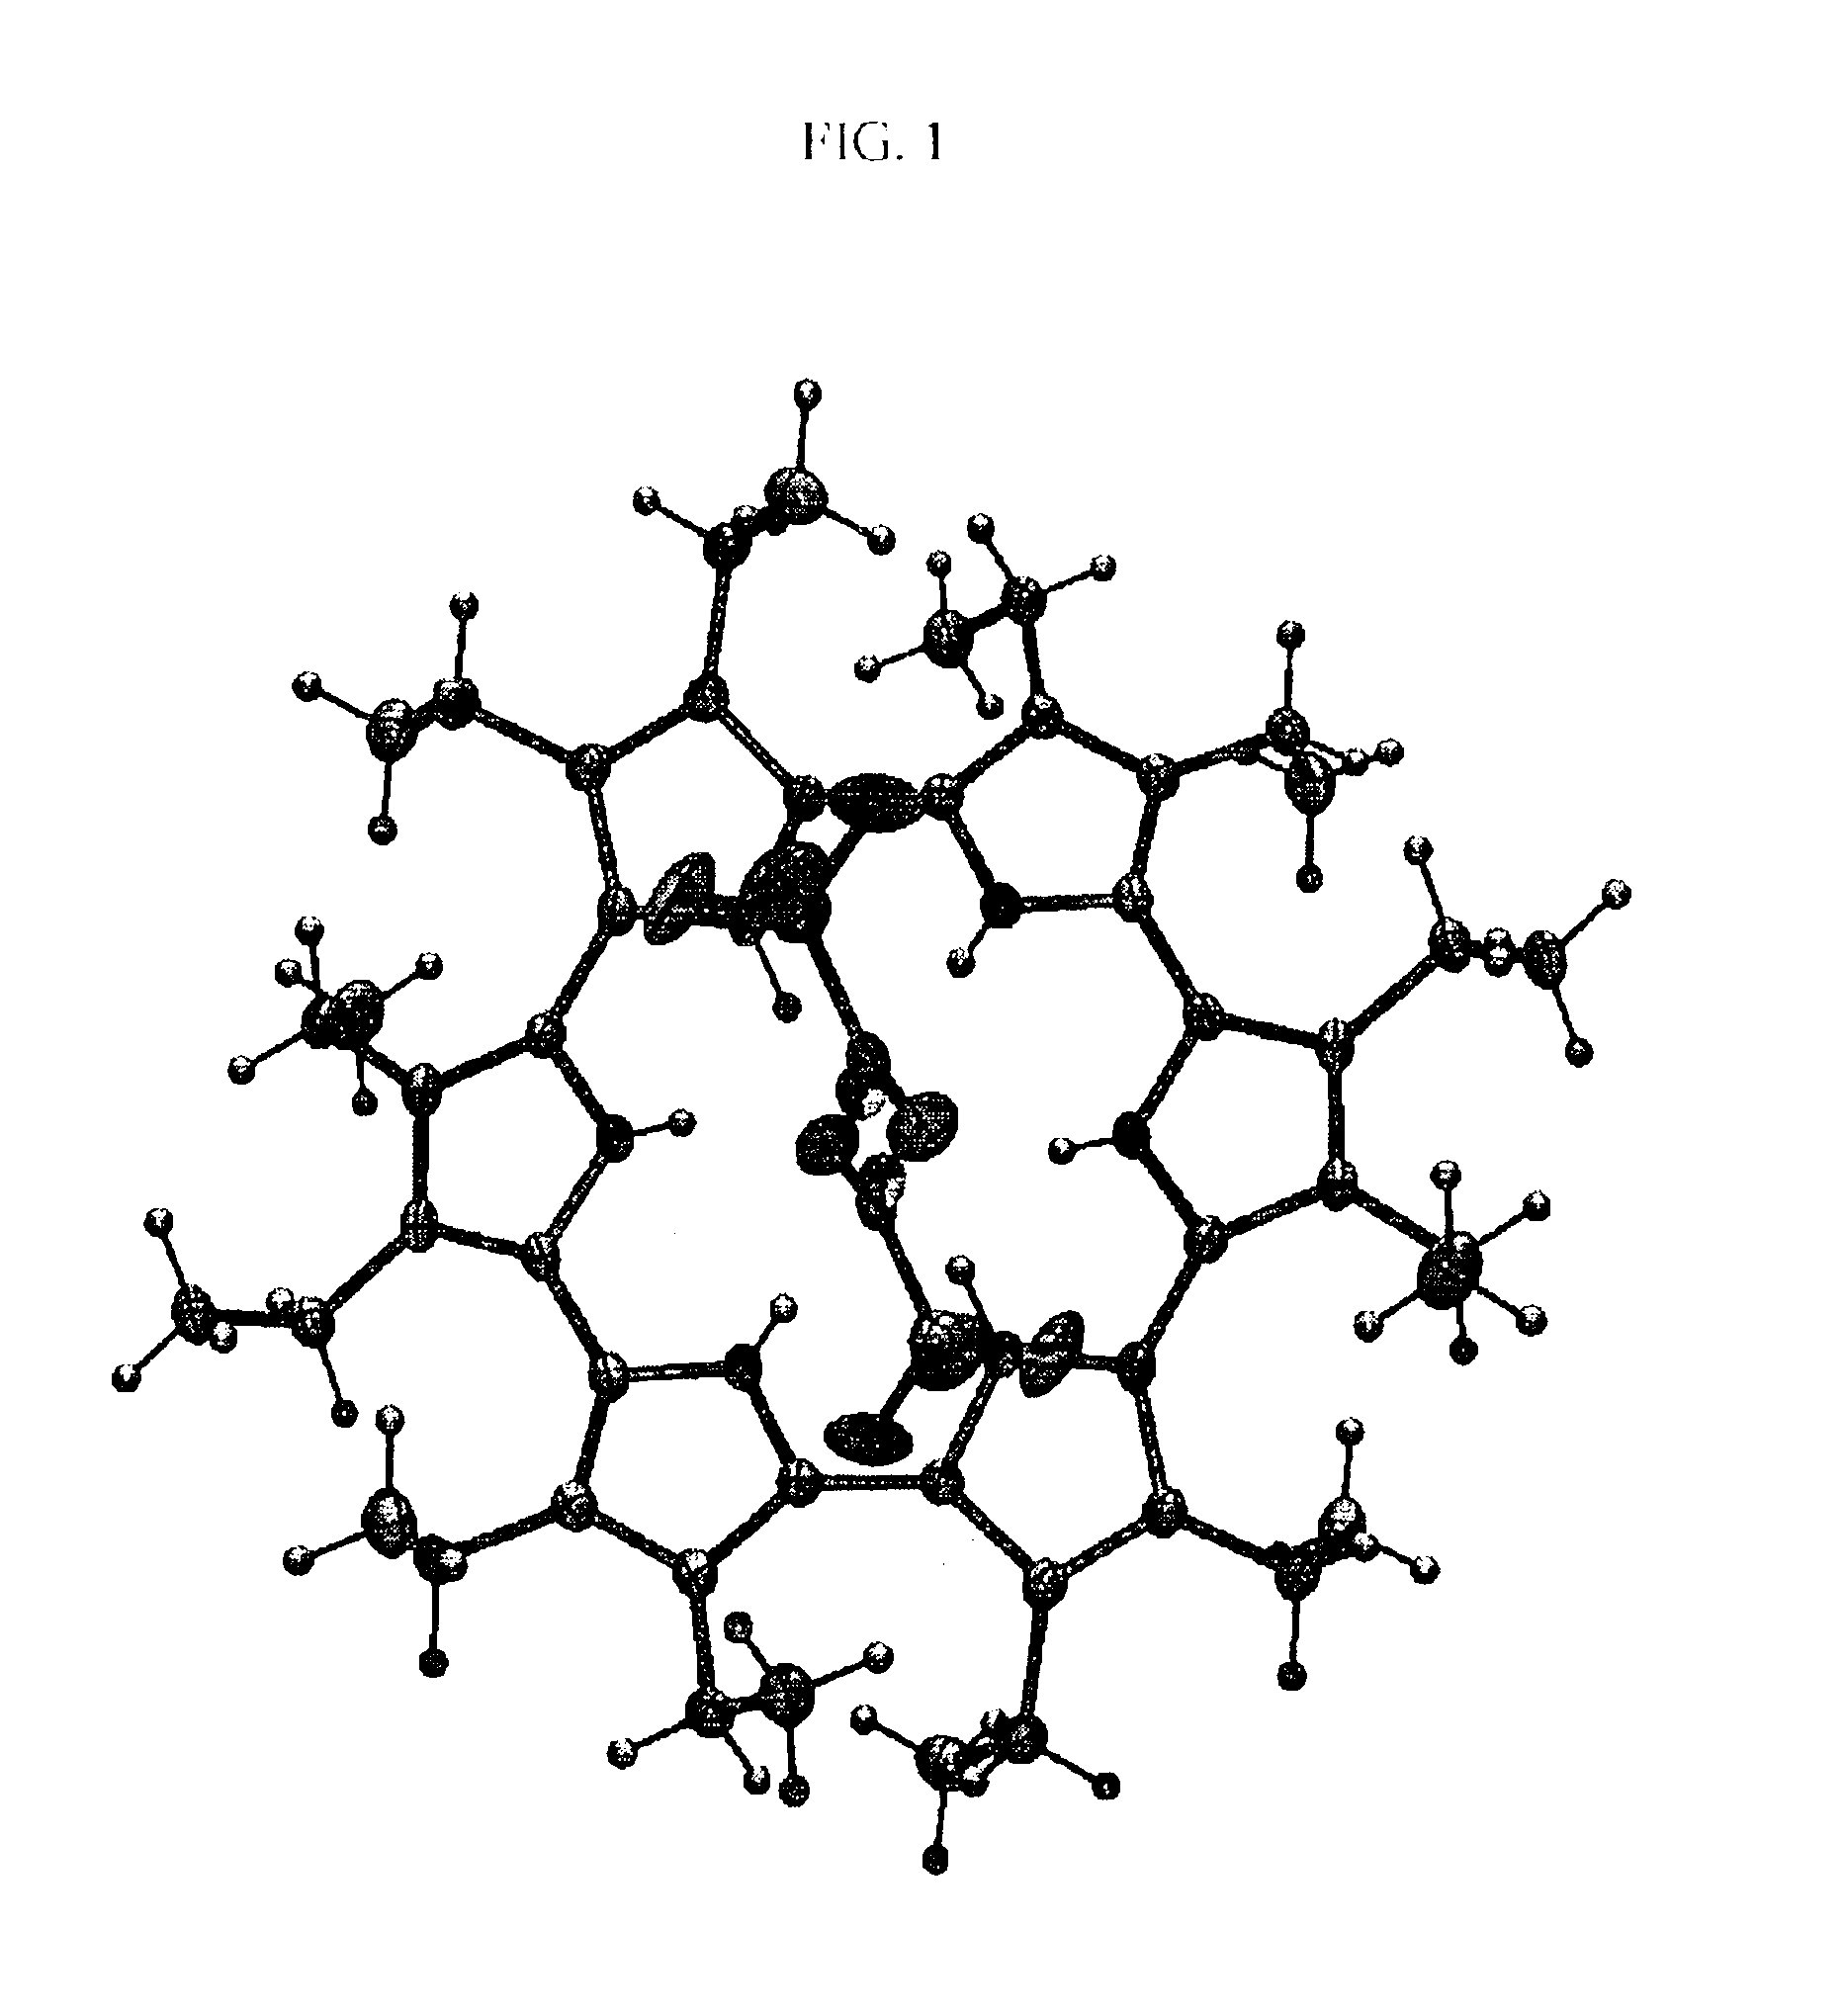 Cyclo[n]pyrroles and methods thereto